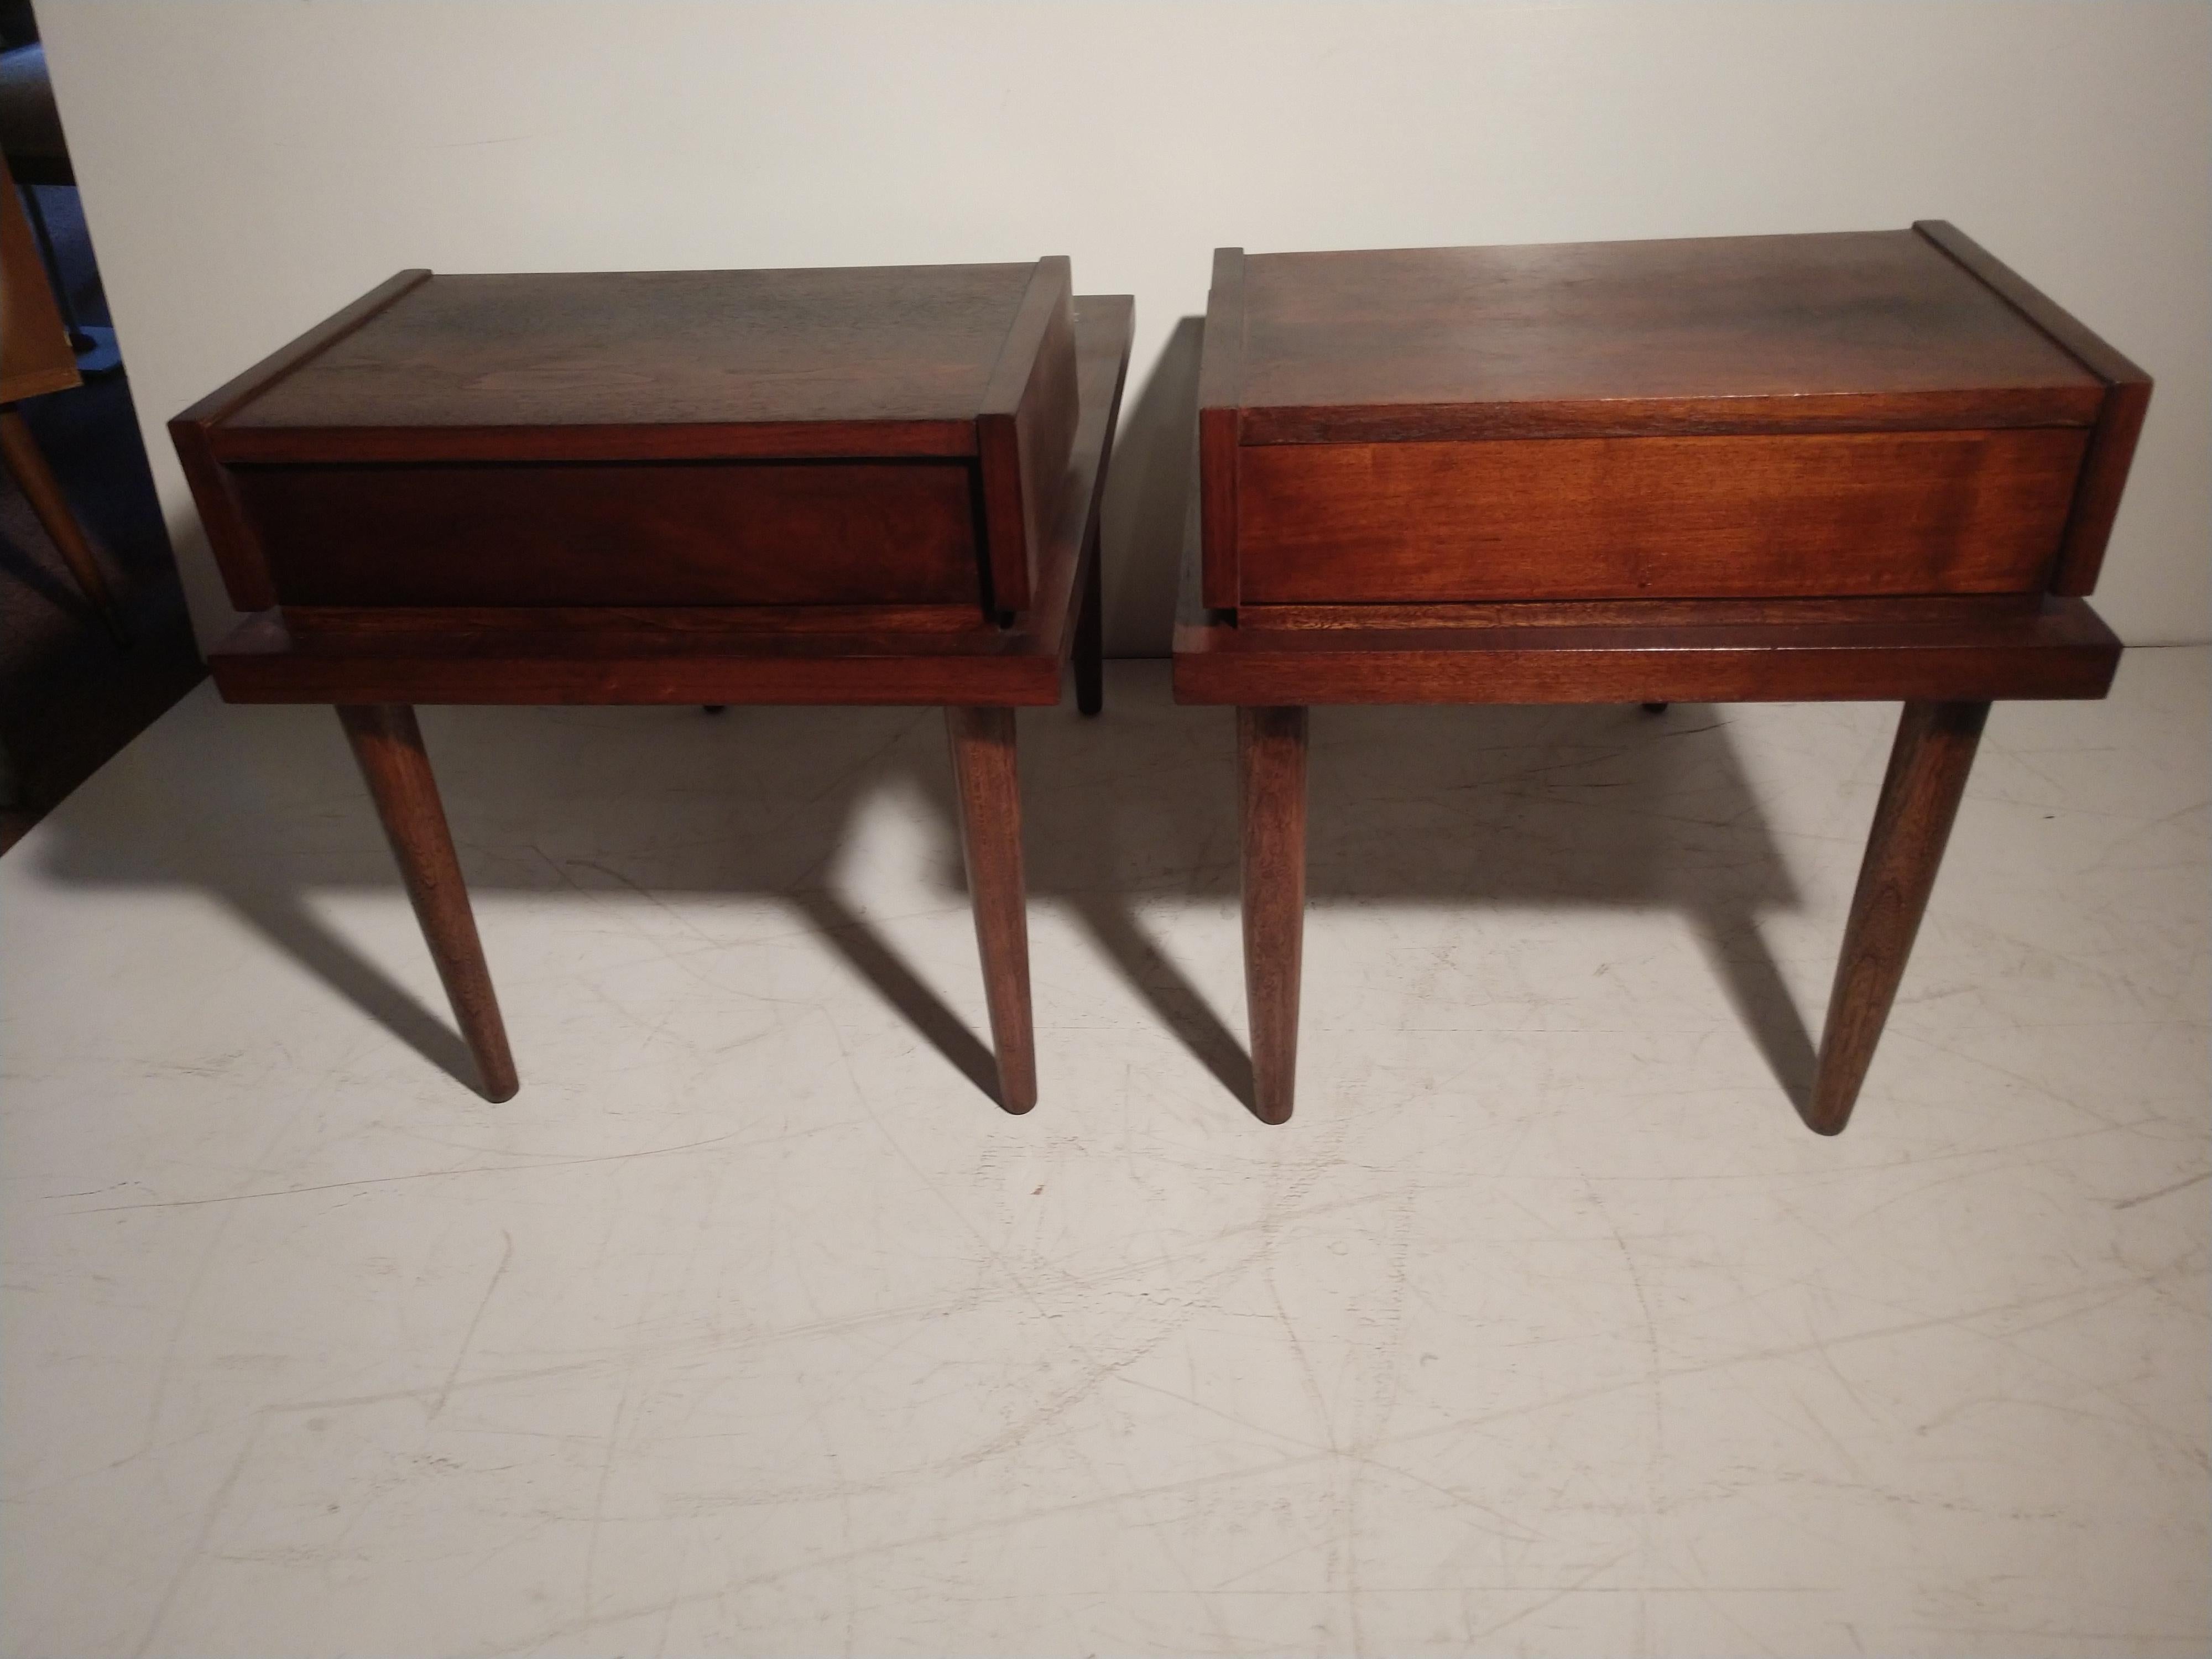 Fabulous pair of Mid-Century Modern end/side tables with a single drawer. Drawer dimensions are 15.75 x 9.25 x 2 H. Tables have been refinished and in great working order. Original drawer pulls have been changed to a similar style. Only one was